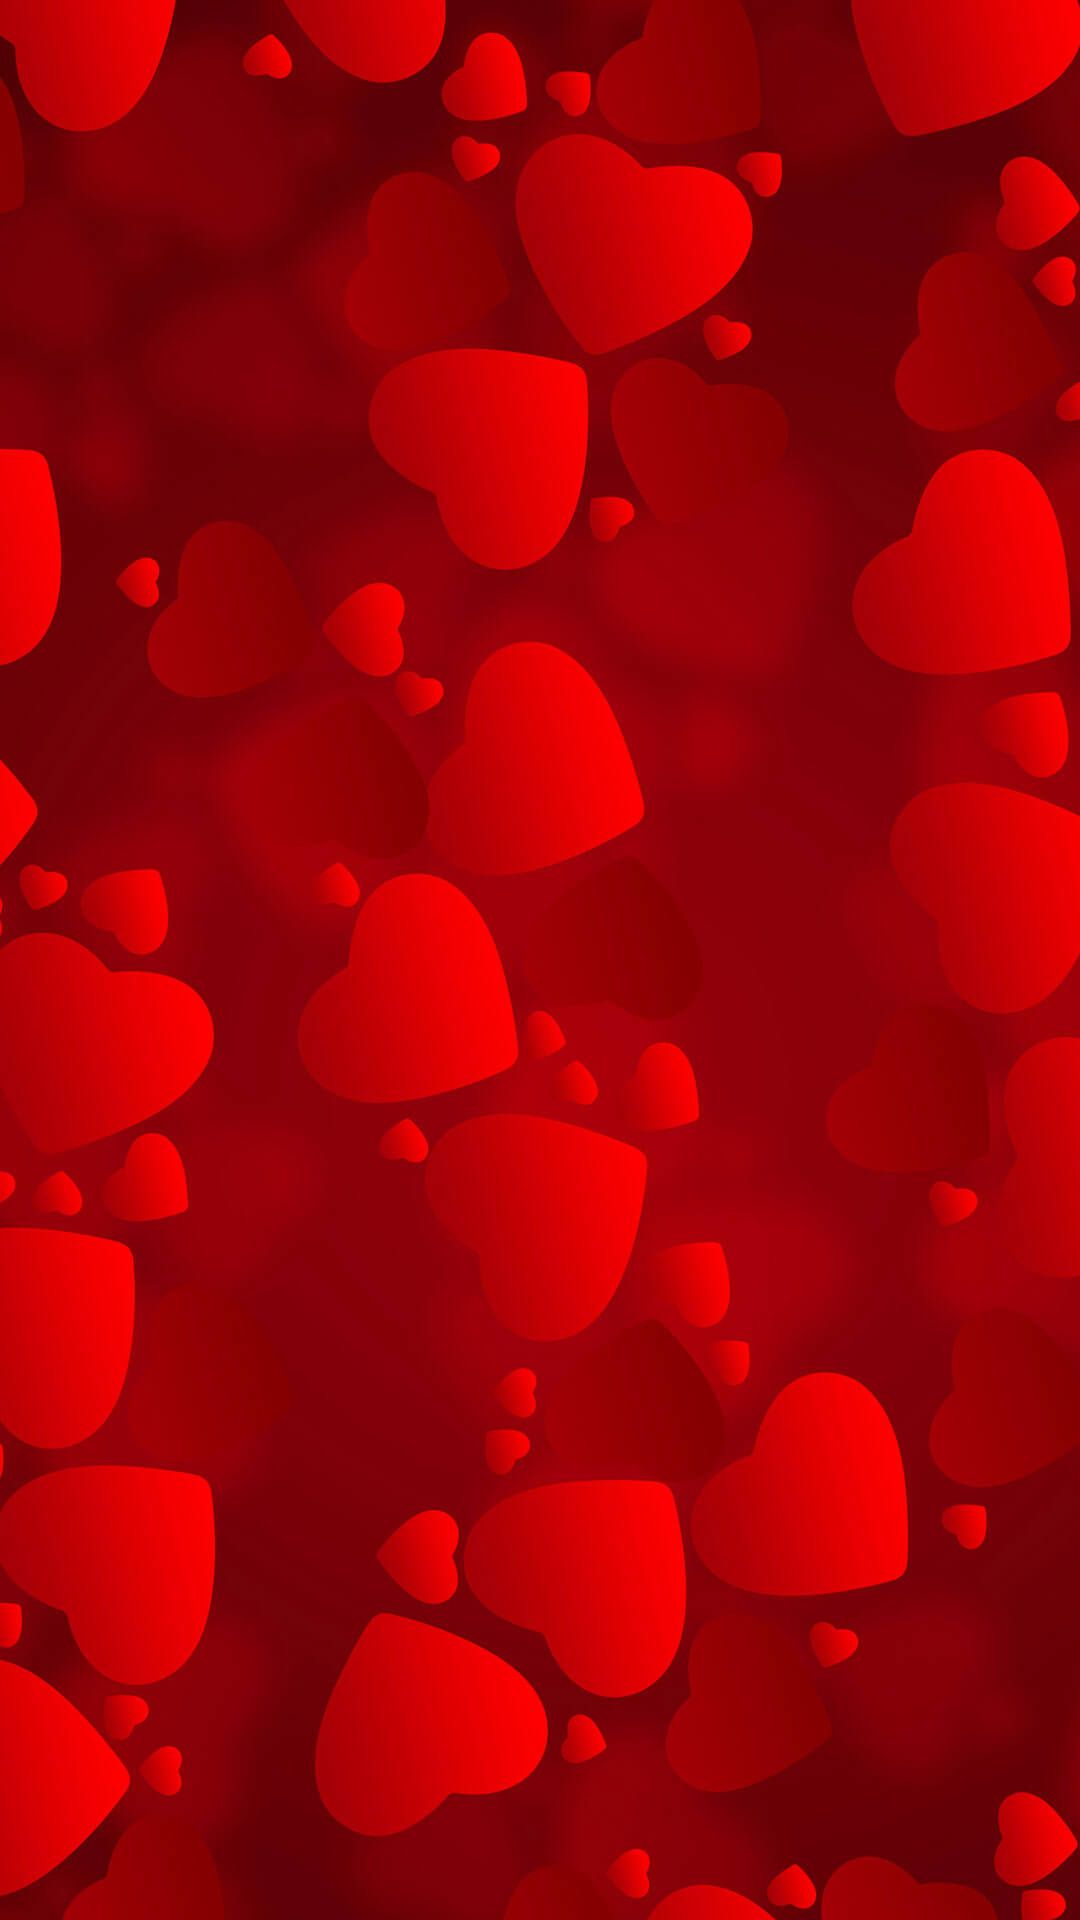 Free download Love iPhone Wallpaper Top Love iPhone Background